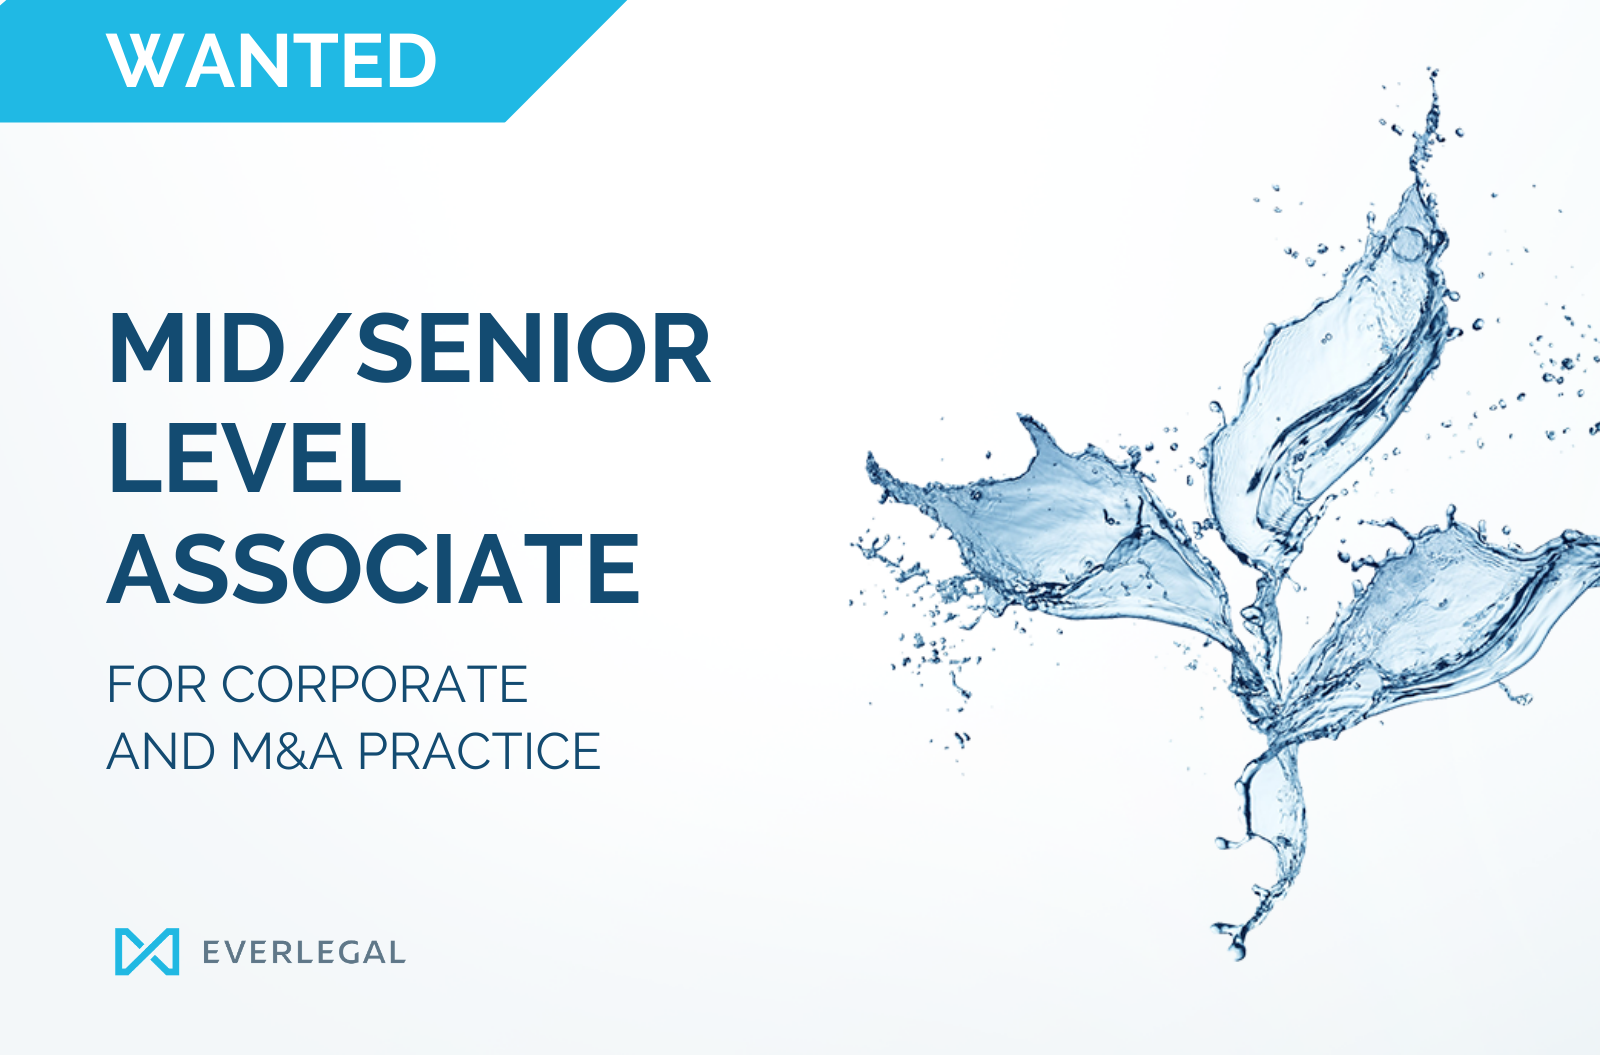 EVERLEGAL is looking for Mid/Senior level Associate for Corporate and M&A practice